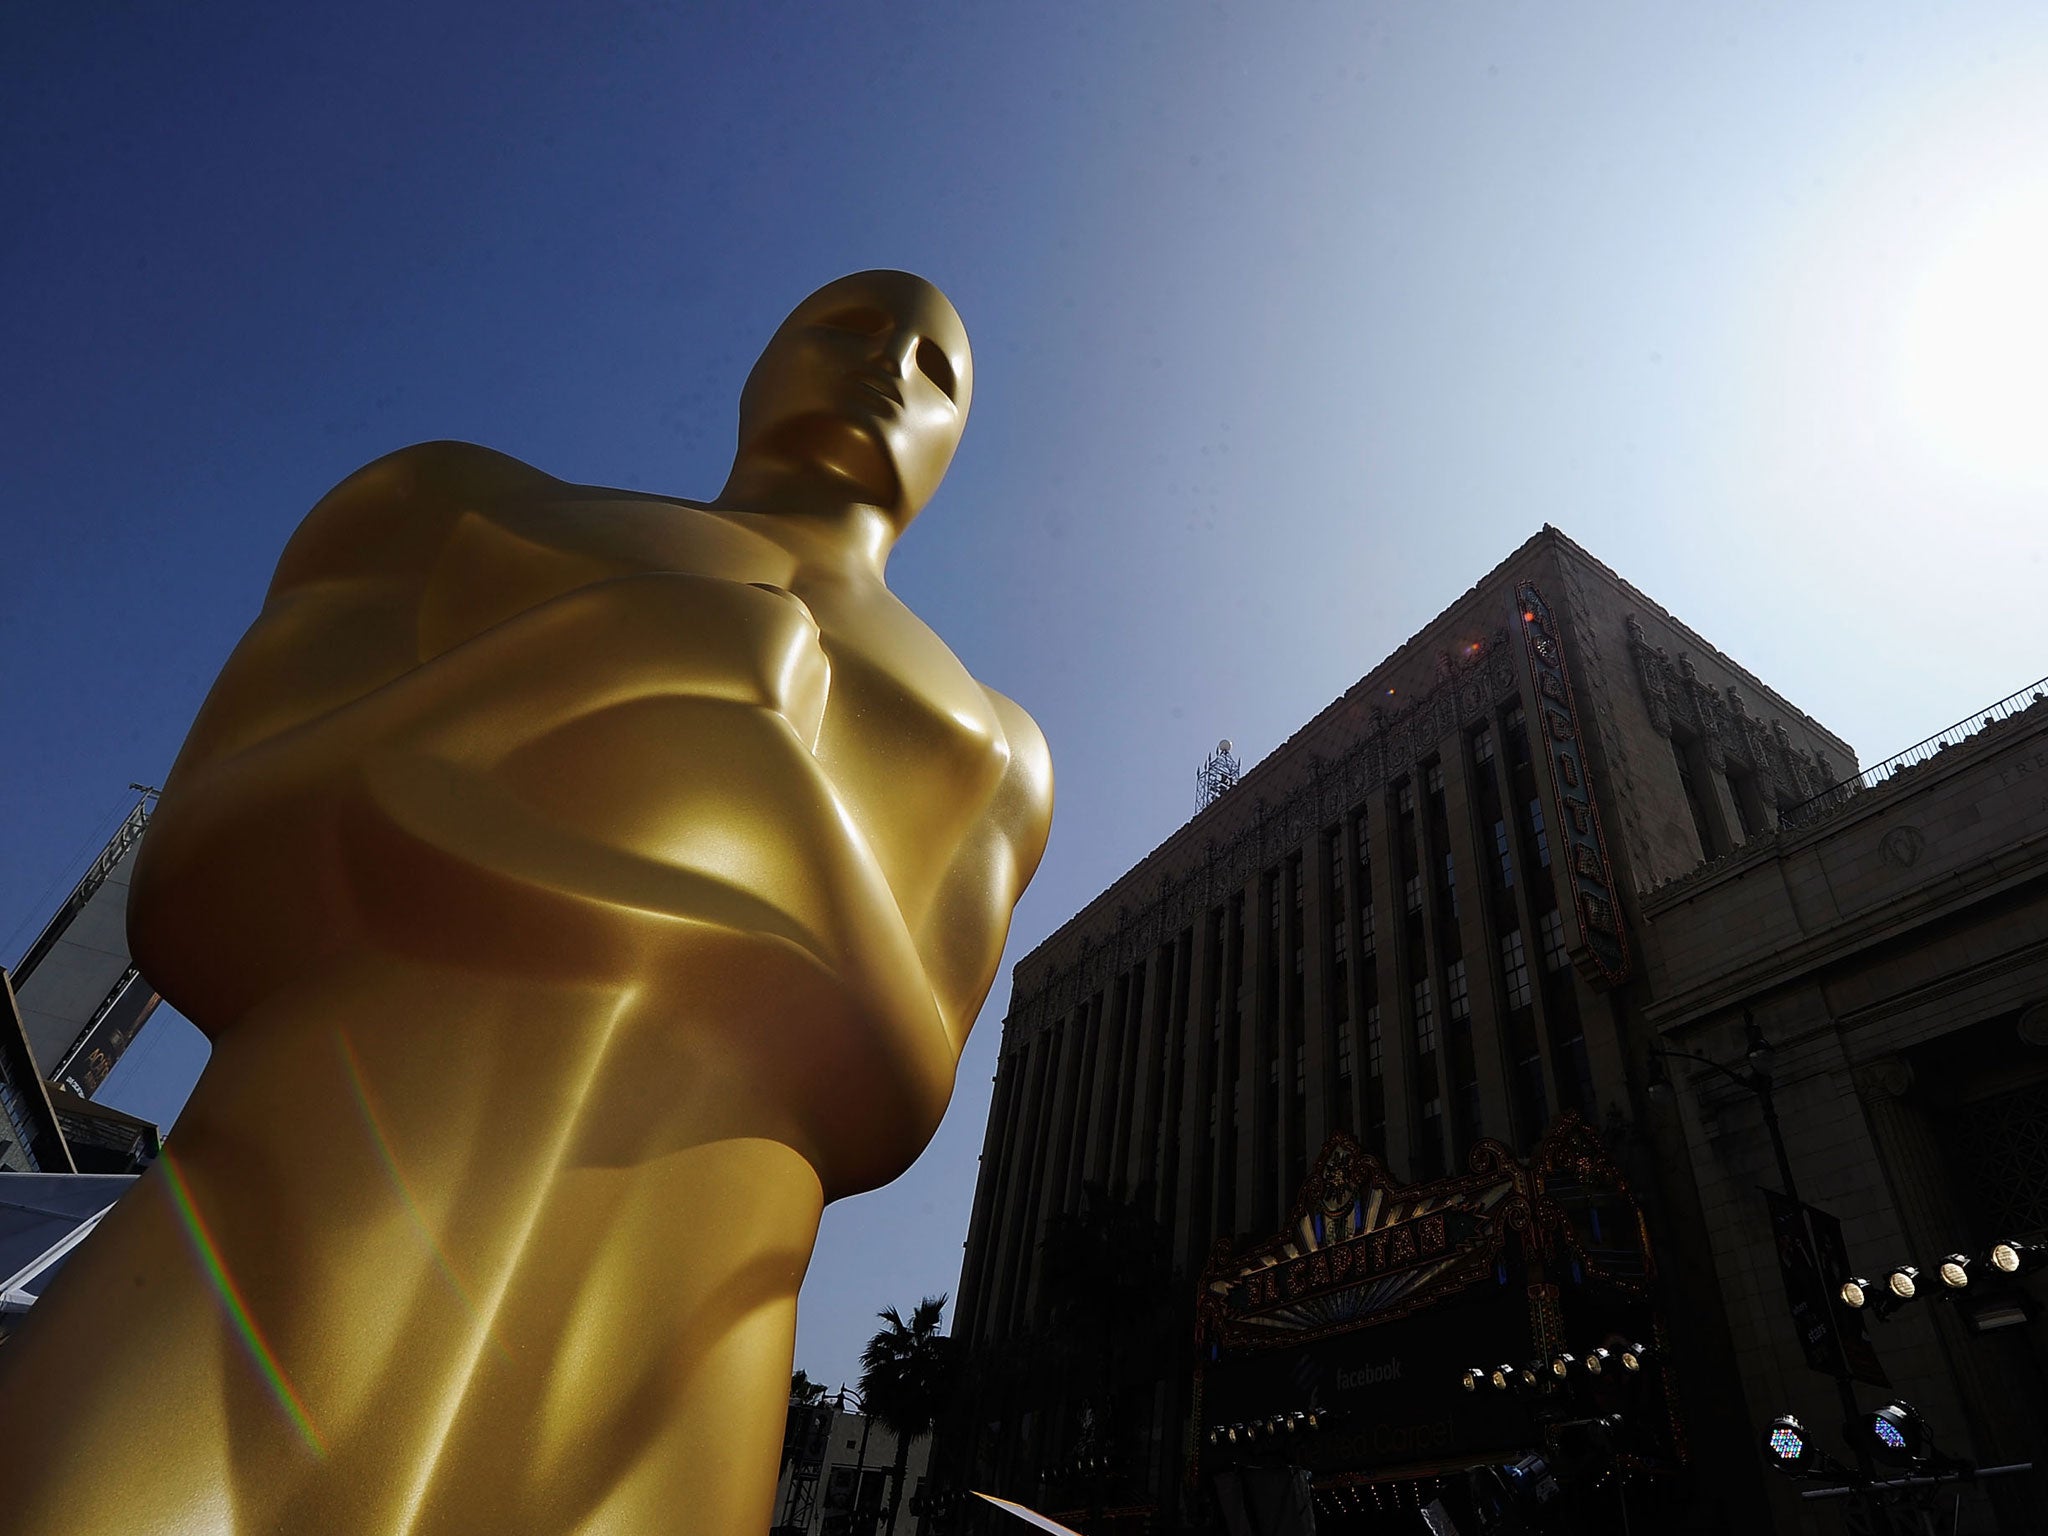 The Oscar statue is seen at the entrance of the Hollywood & Highland Center before the 84th Annual Academy Awards held on February 26, 2012 in Hollywood, California.